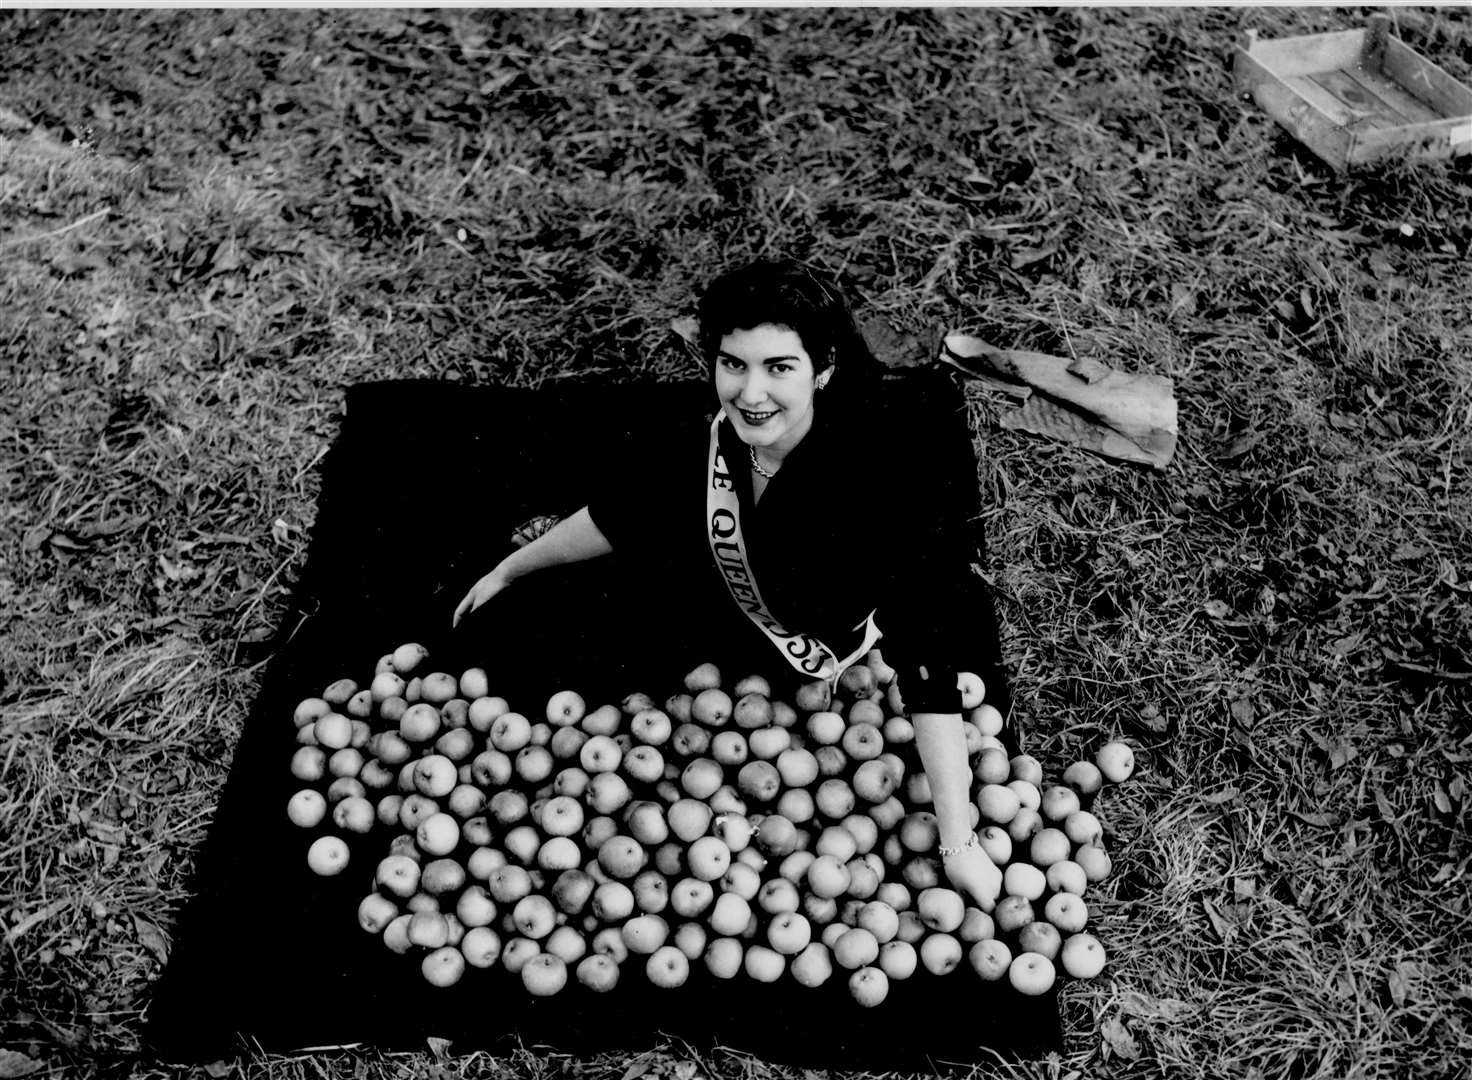 Miss June Kirk, 18, of Littlebourne, was elected the first Apple Queen of England for the East Kent Fruit show in Canterbury in November 1953. Her prizes included a frock and nylons